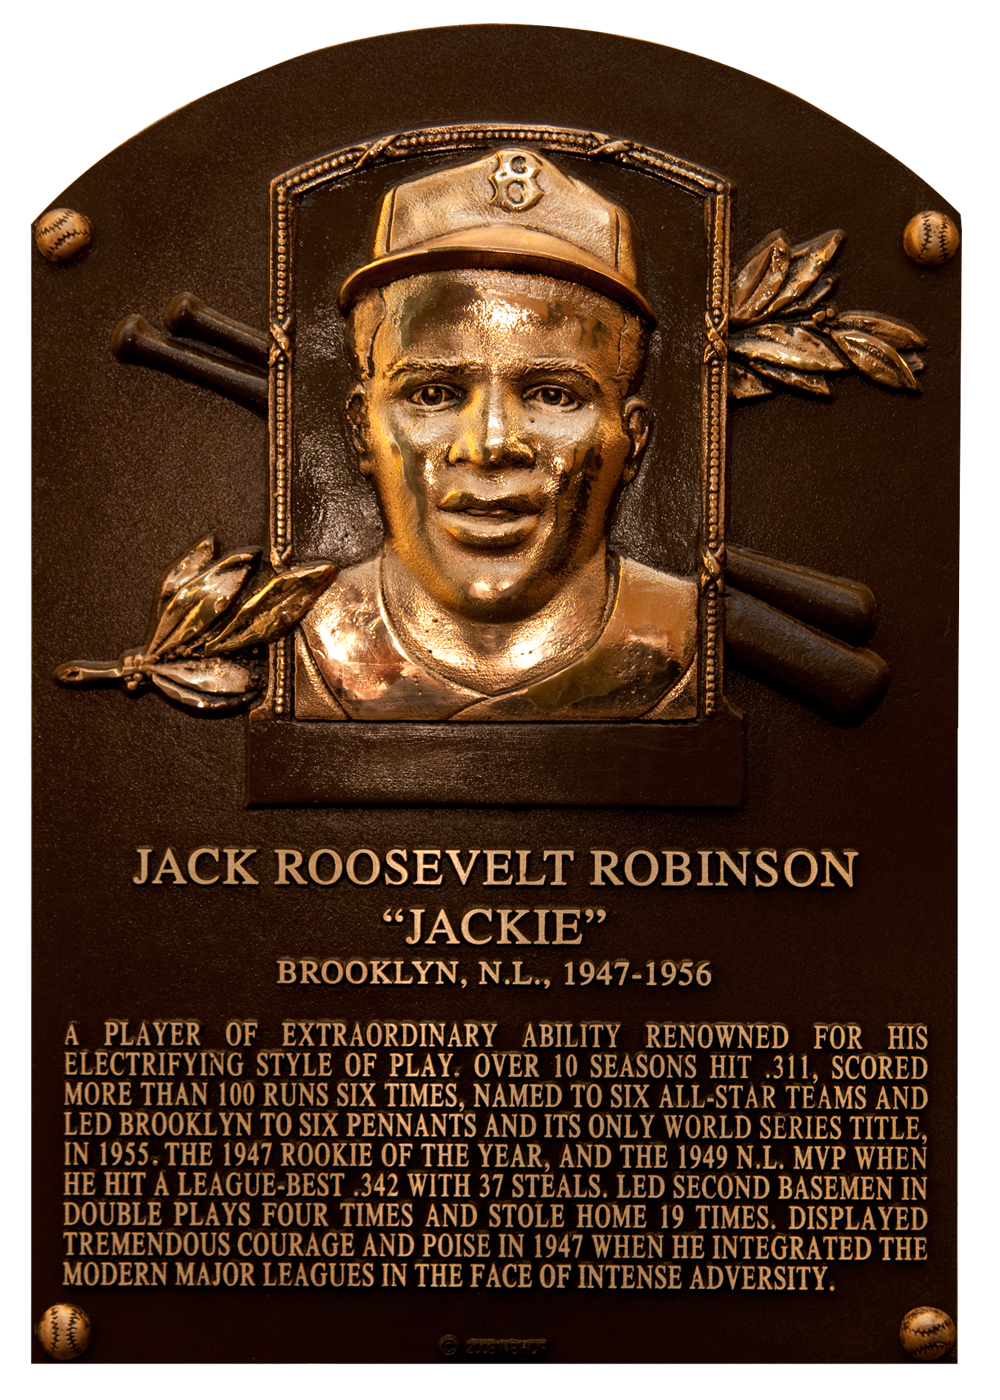 Jackie Robinson Hall of Fame plaque